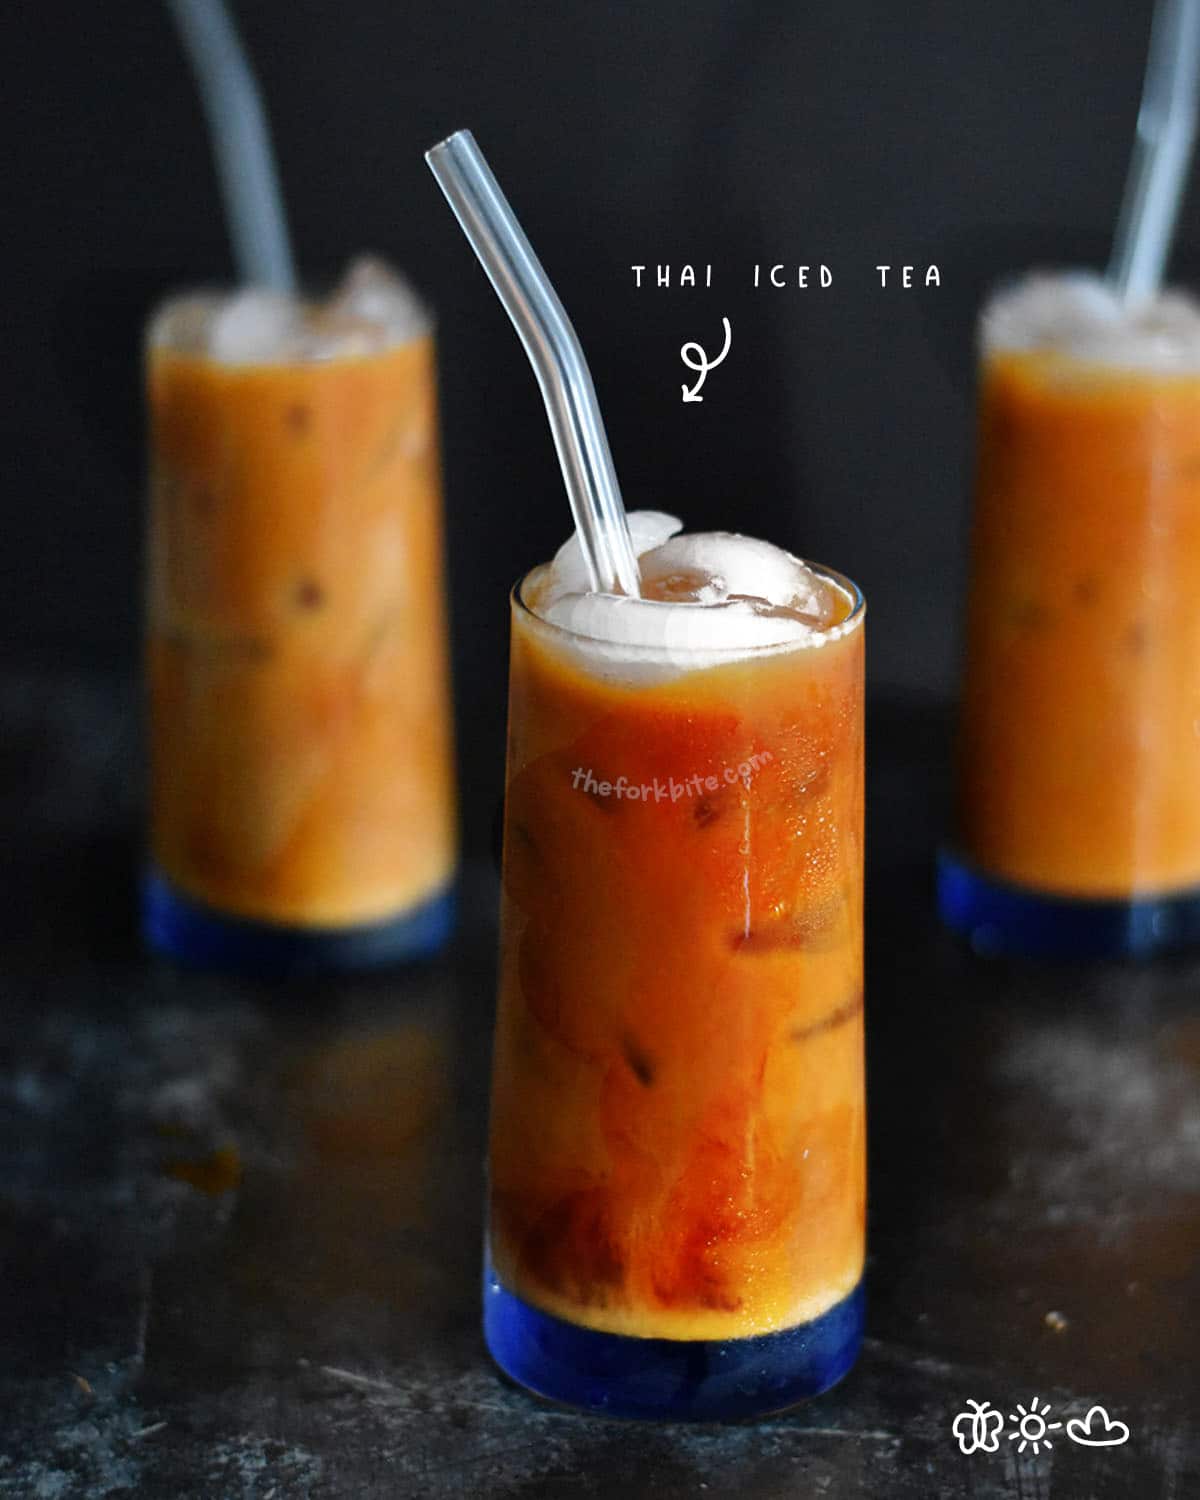 No wonder Thai iced tea is such a popular drink—it's got caffeine in it! Well, not a lot of caffeine, but still enough to give you a little boost.